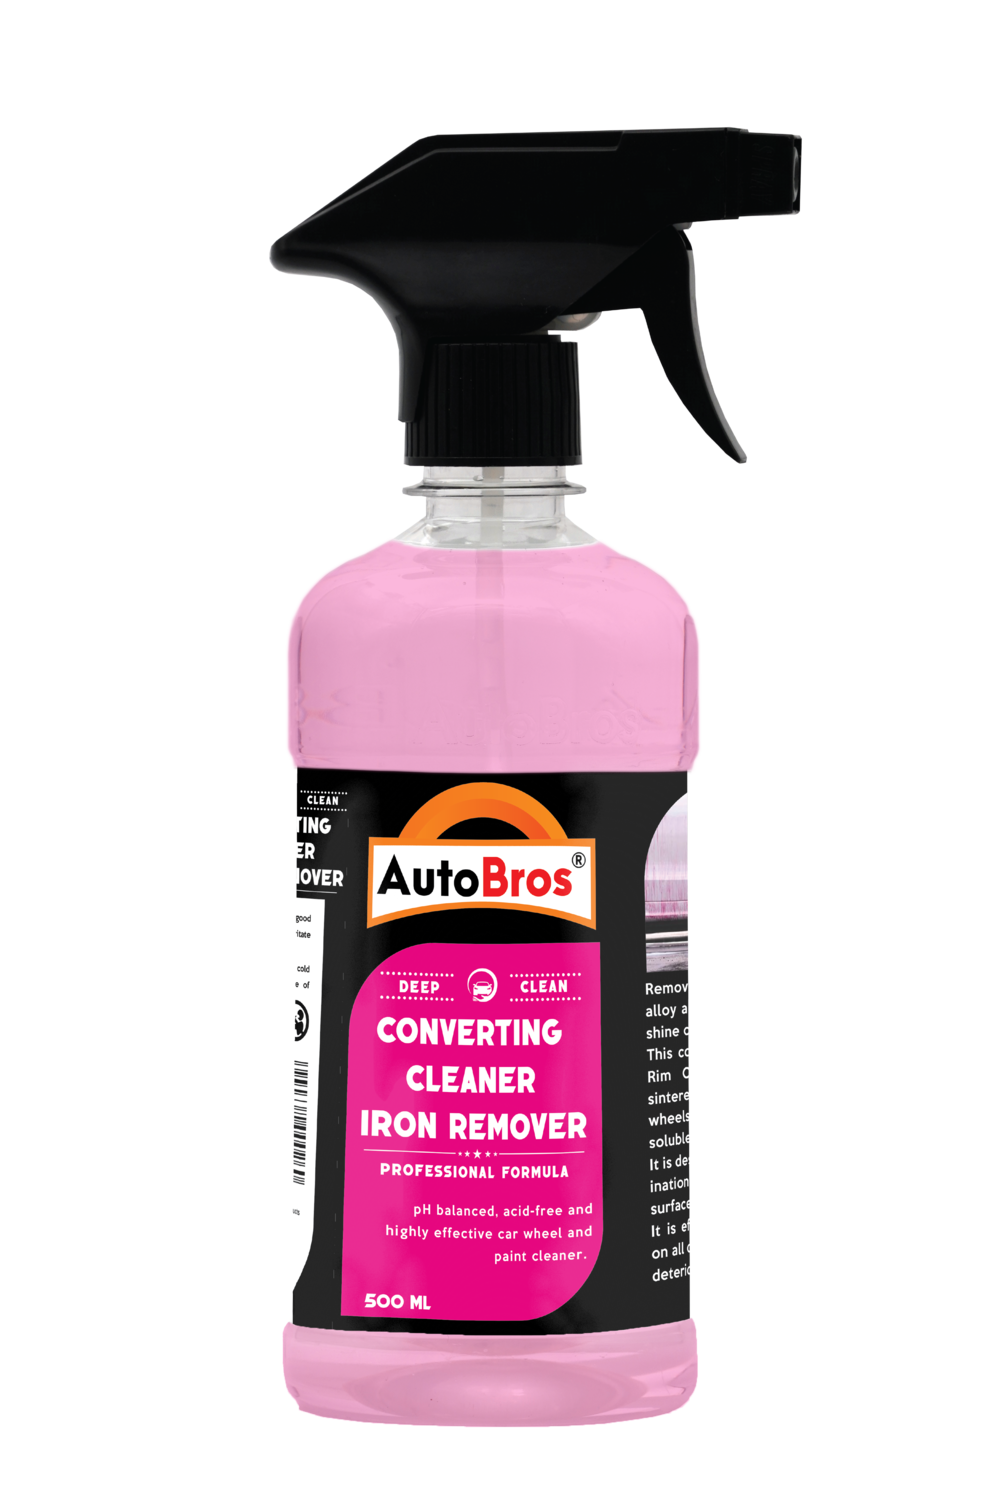 Converting Cleaner - Iron Remover from Painted Surfaces & Alloy Wheels